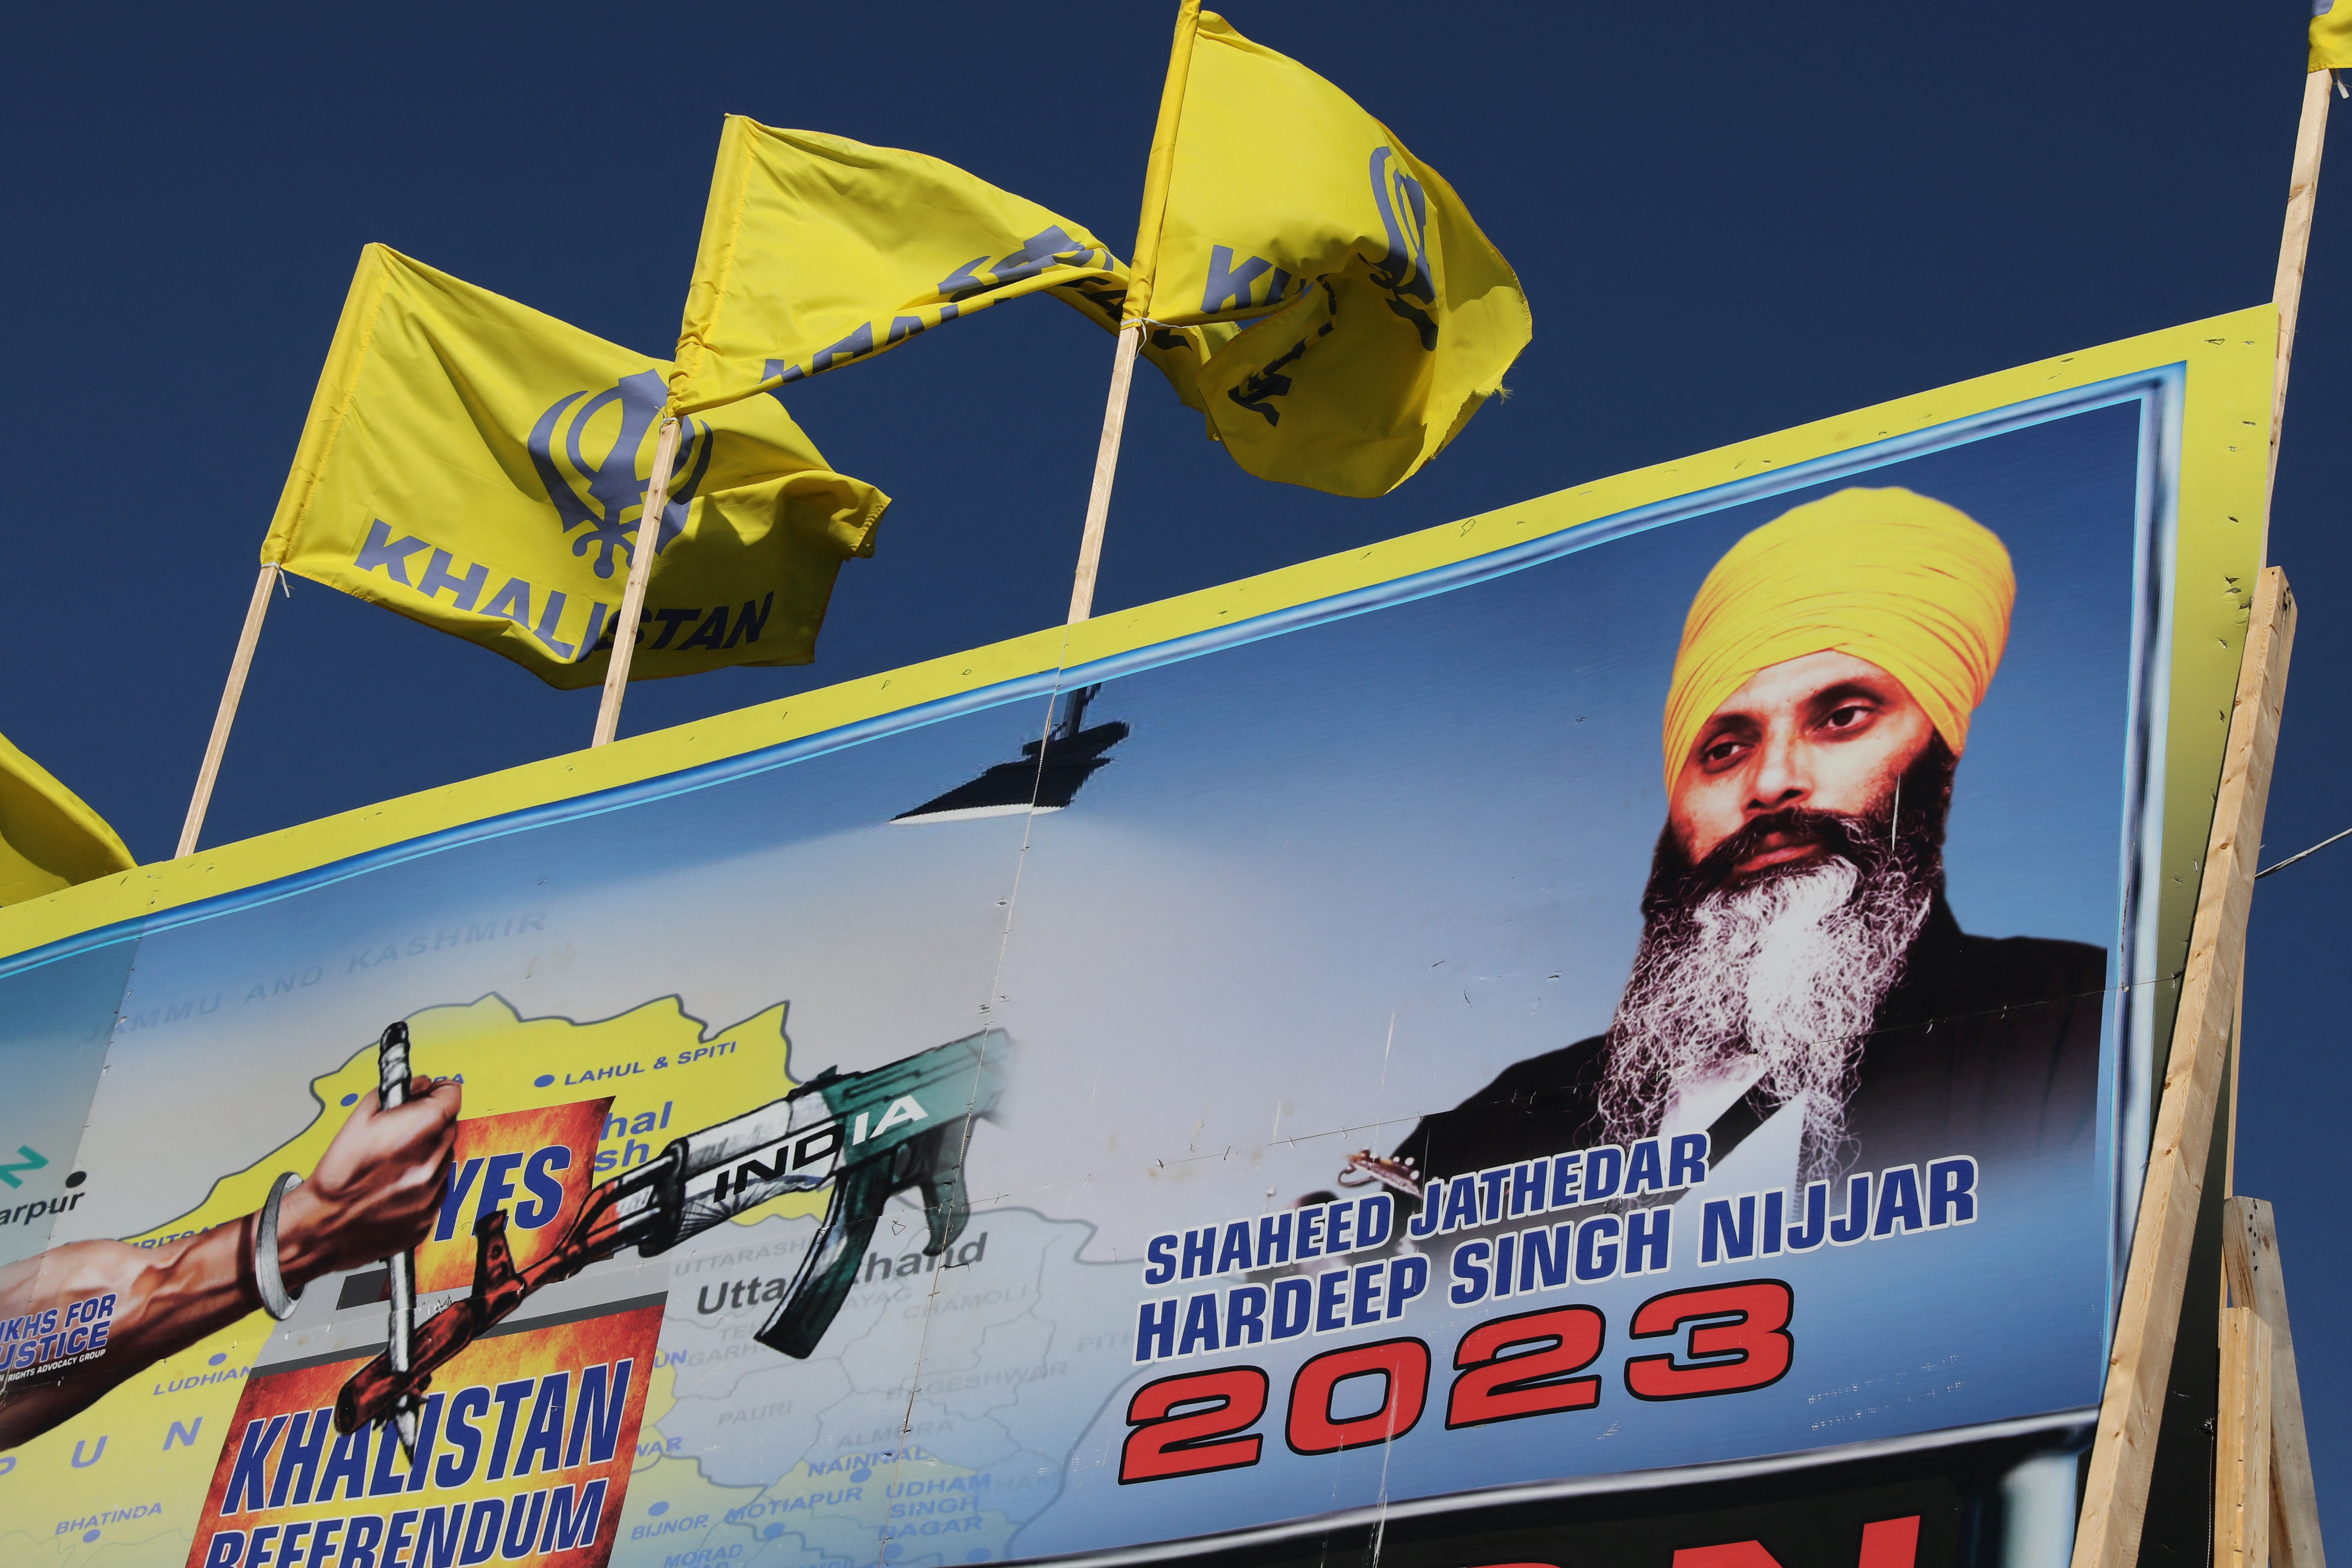 A mural features the image of late Sikh leader Hardeep Singh Nijjar, who was slain on the grounds of the Guru Nanak Sikh Gurdwara temple in June 2023 in Surrey